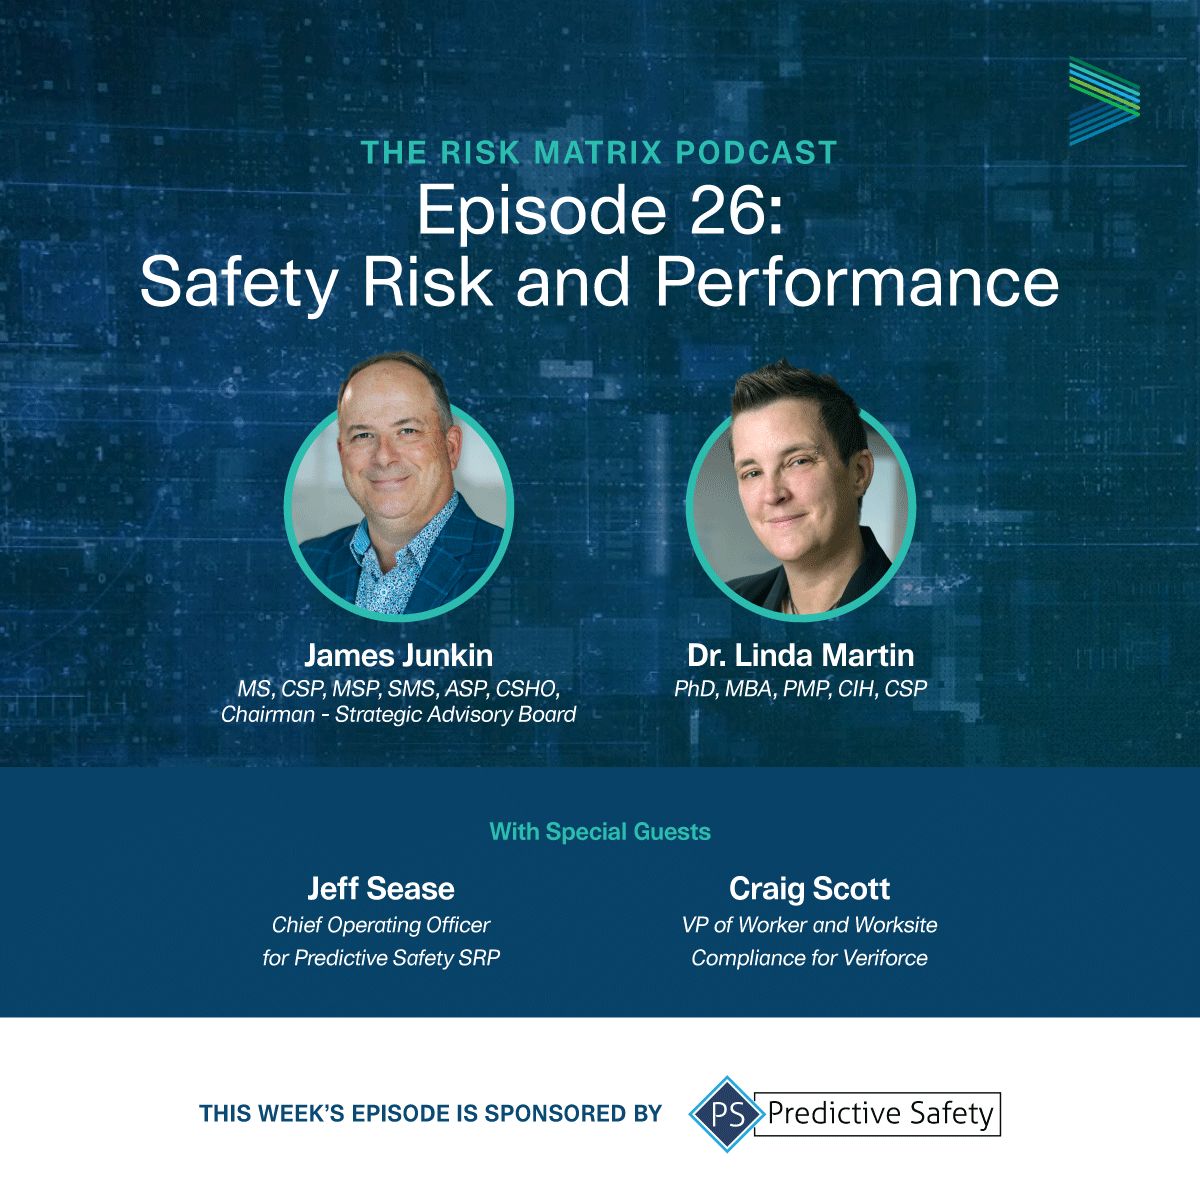 The Risk Matrix Featuring Predictive Safety: Safety Risk and Performance